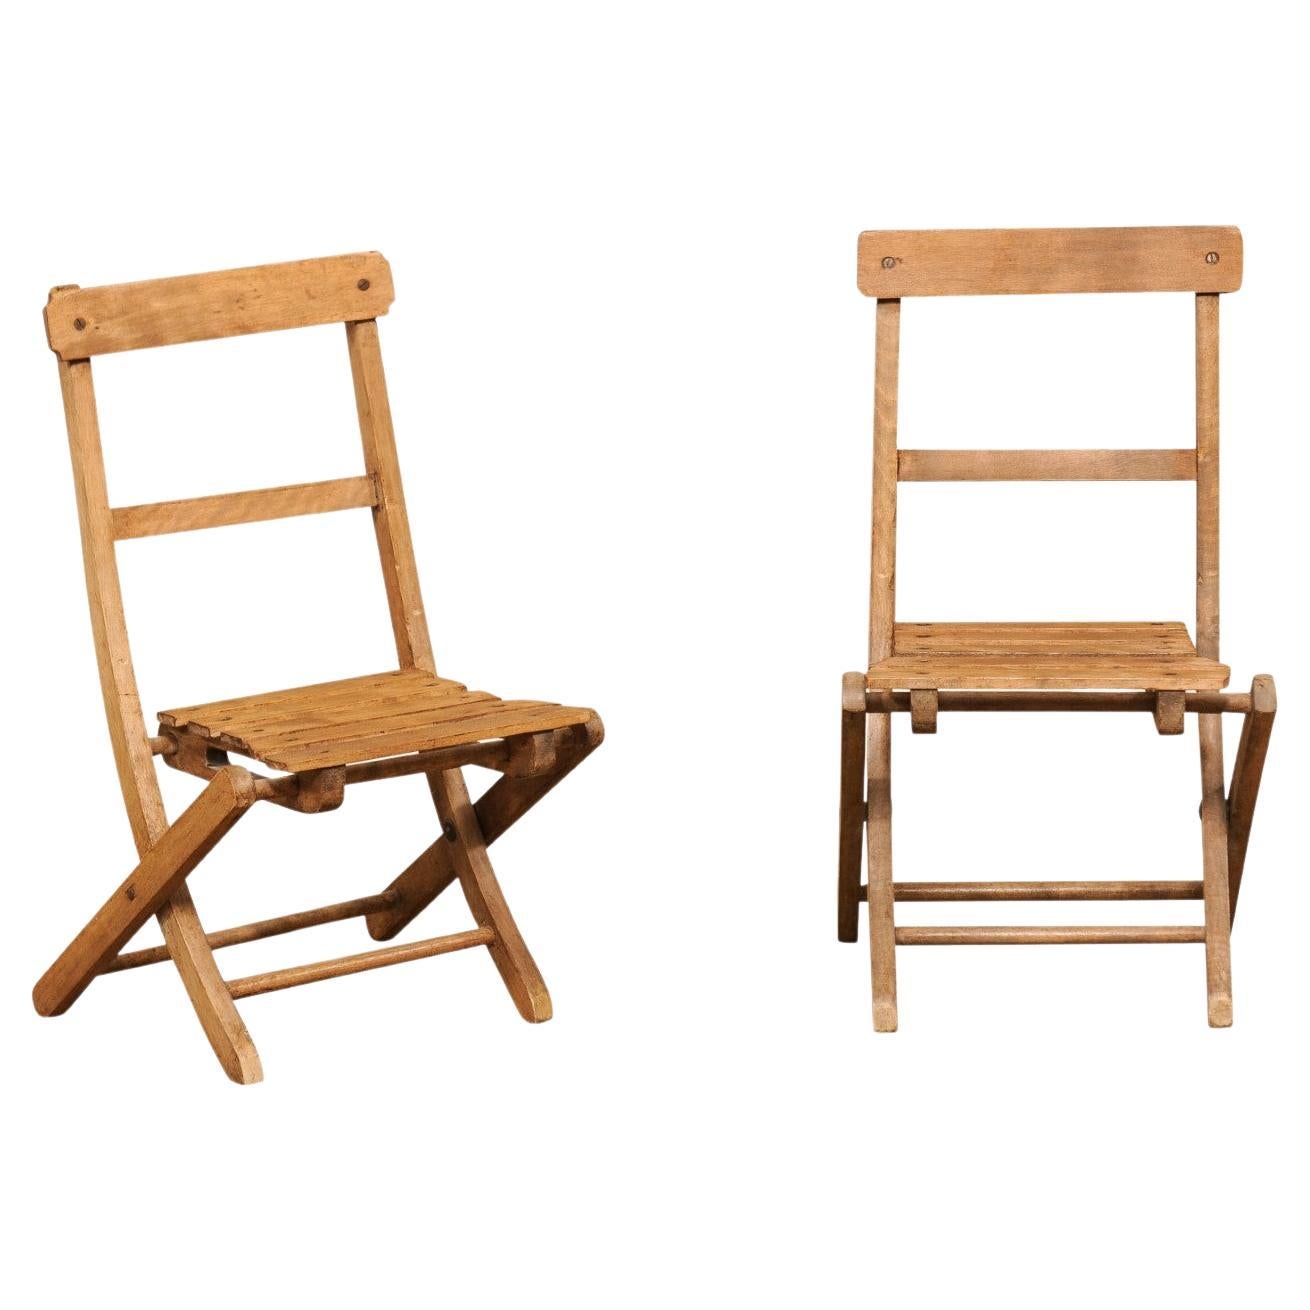 Petite English Rustic Wooden Children's Folding Chairs, Sold Individually